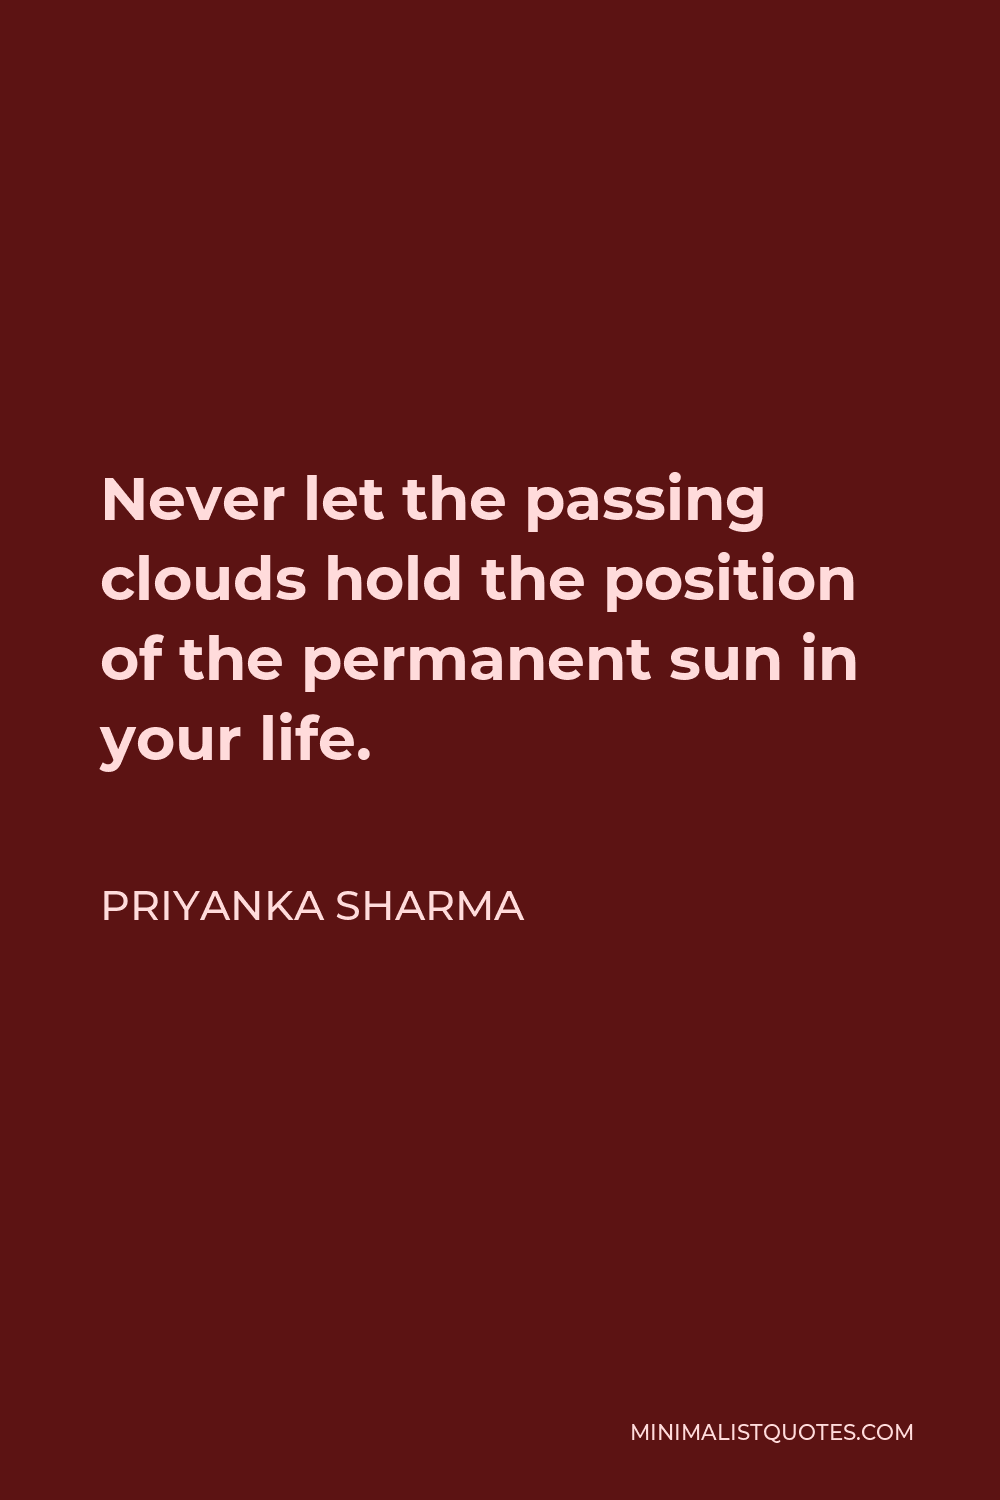 Priyanka Sharma Quote - Never let the passing clouds hold the position of the permanent sun in your life.